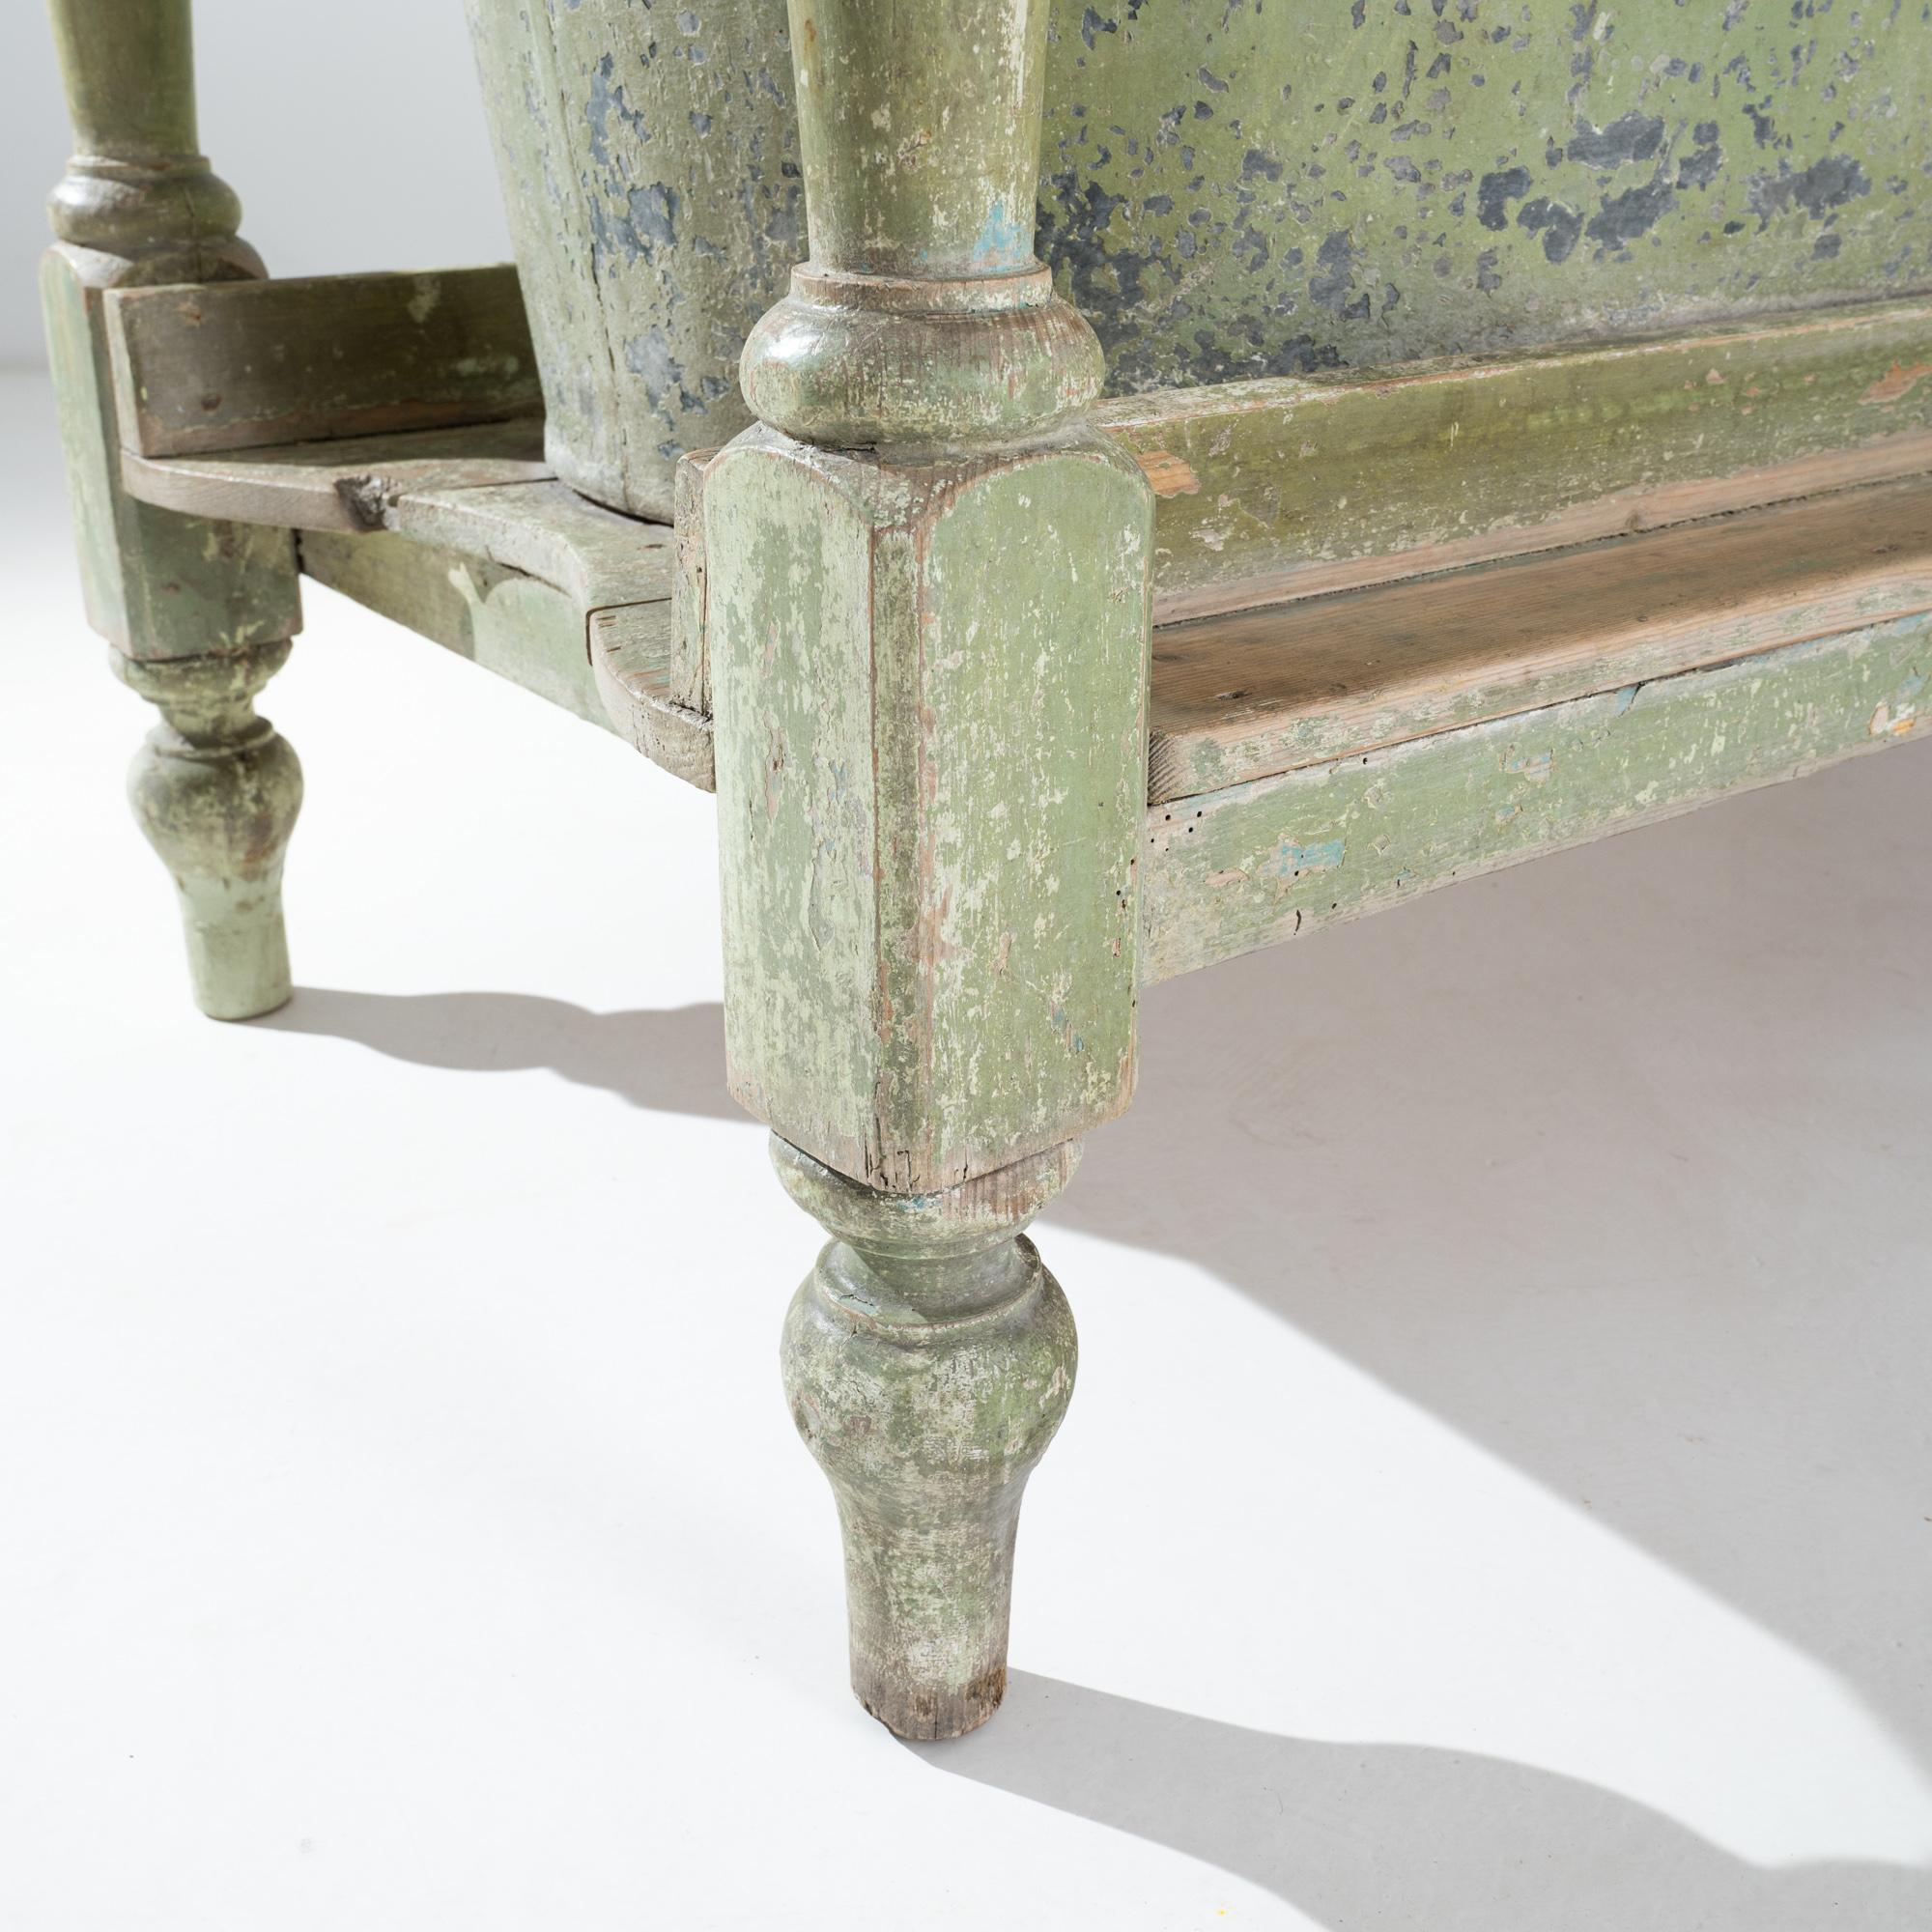 19th Century French Wooden Table with Zinc Bath 8